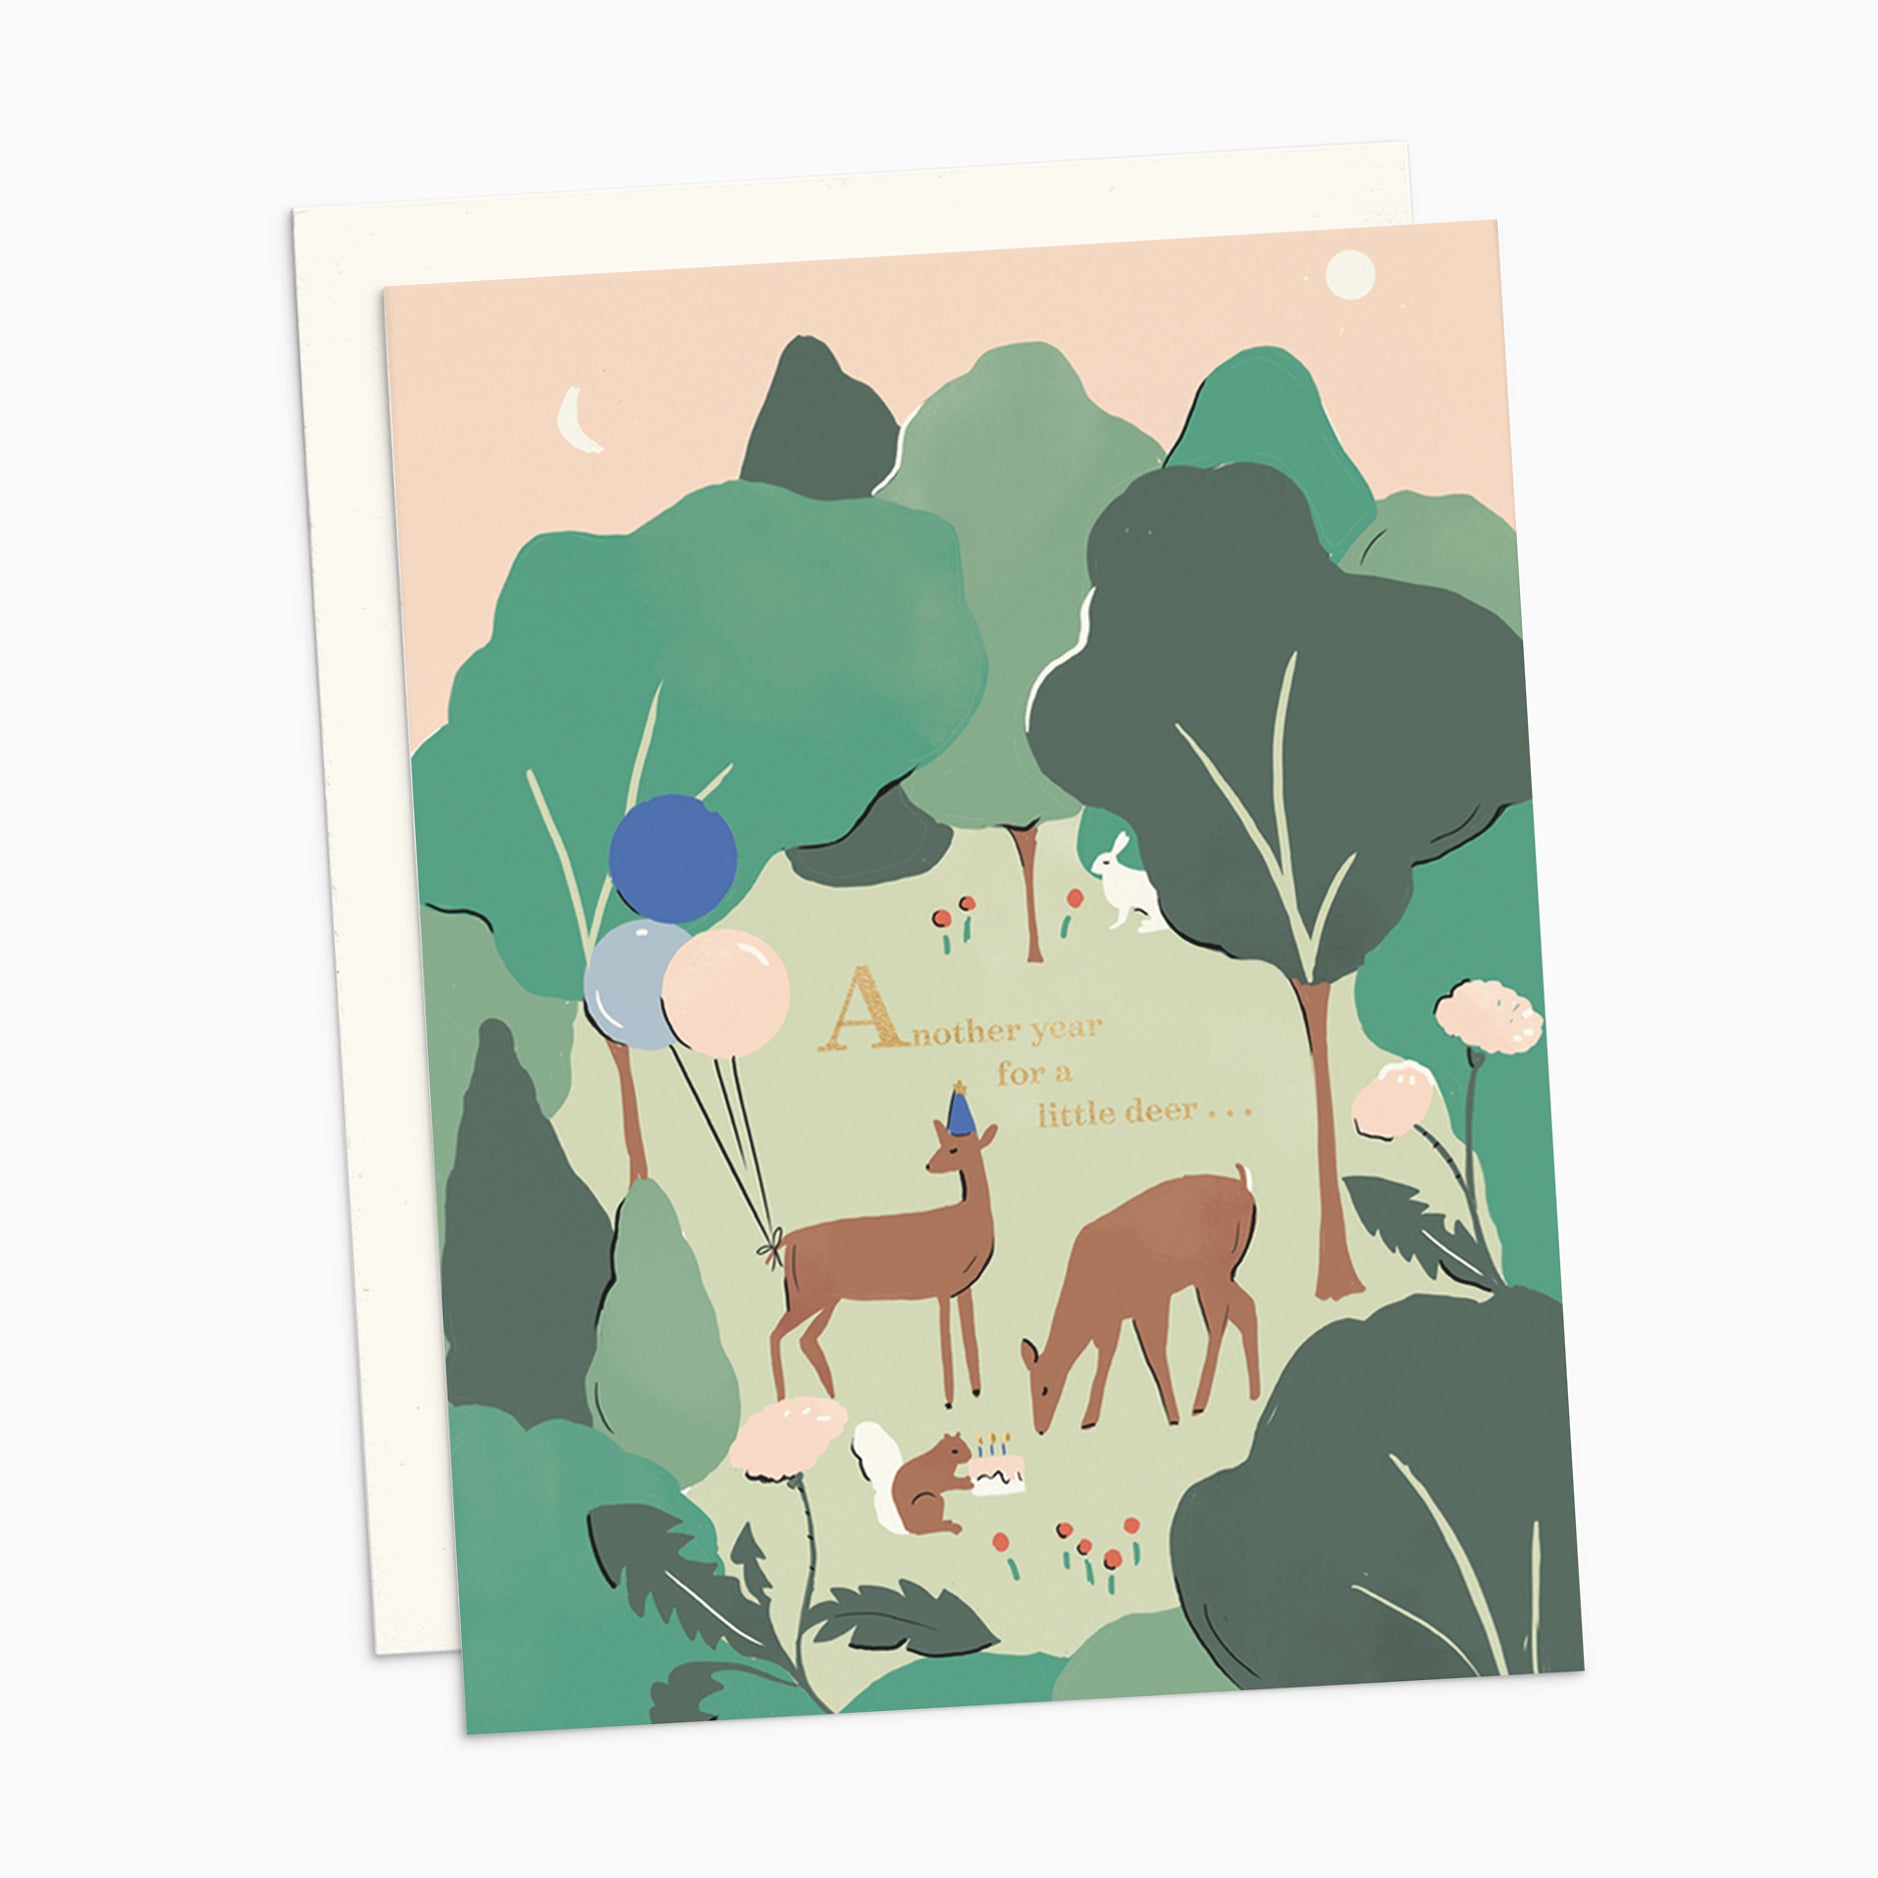 Illustrated birthday card with metallic gold foil text saying 'Another Year Older, My Little Deer,' featuring two deer in birthday hats with balloons on warm white cover cardstock.